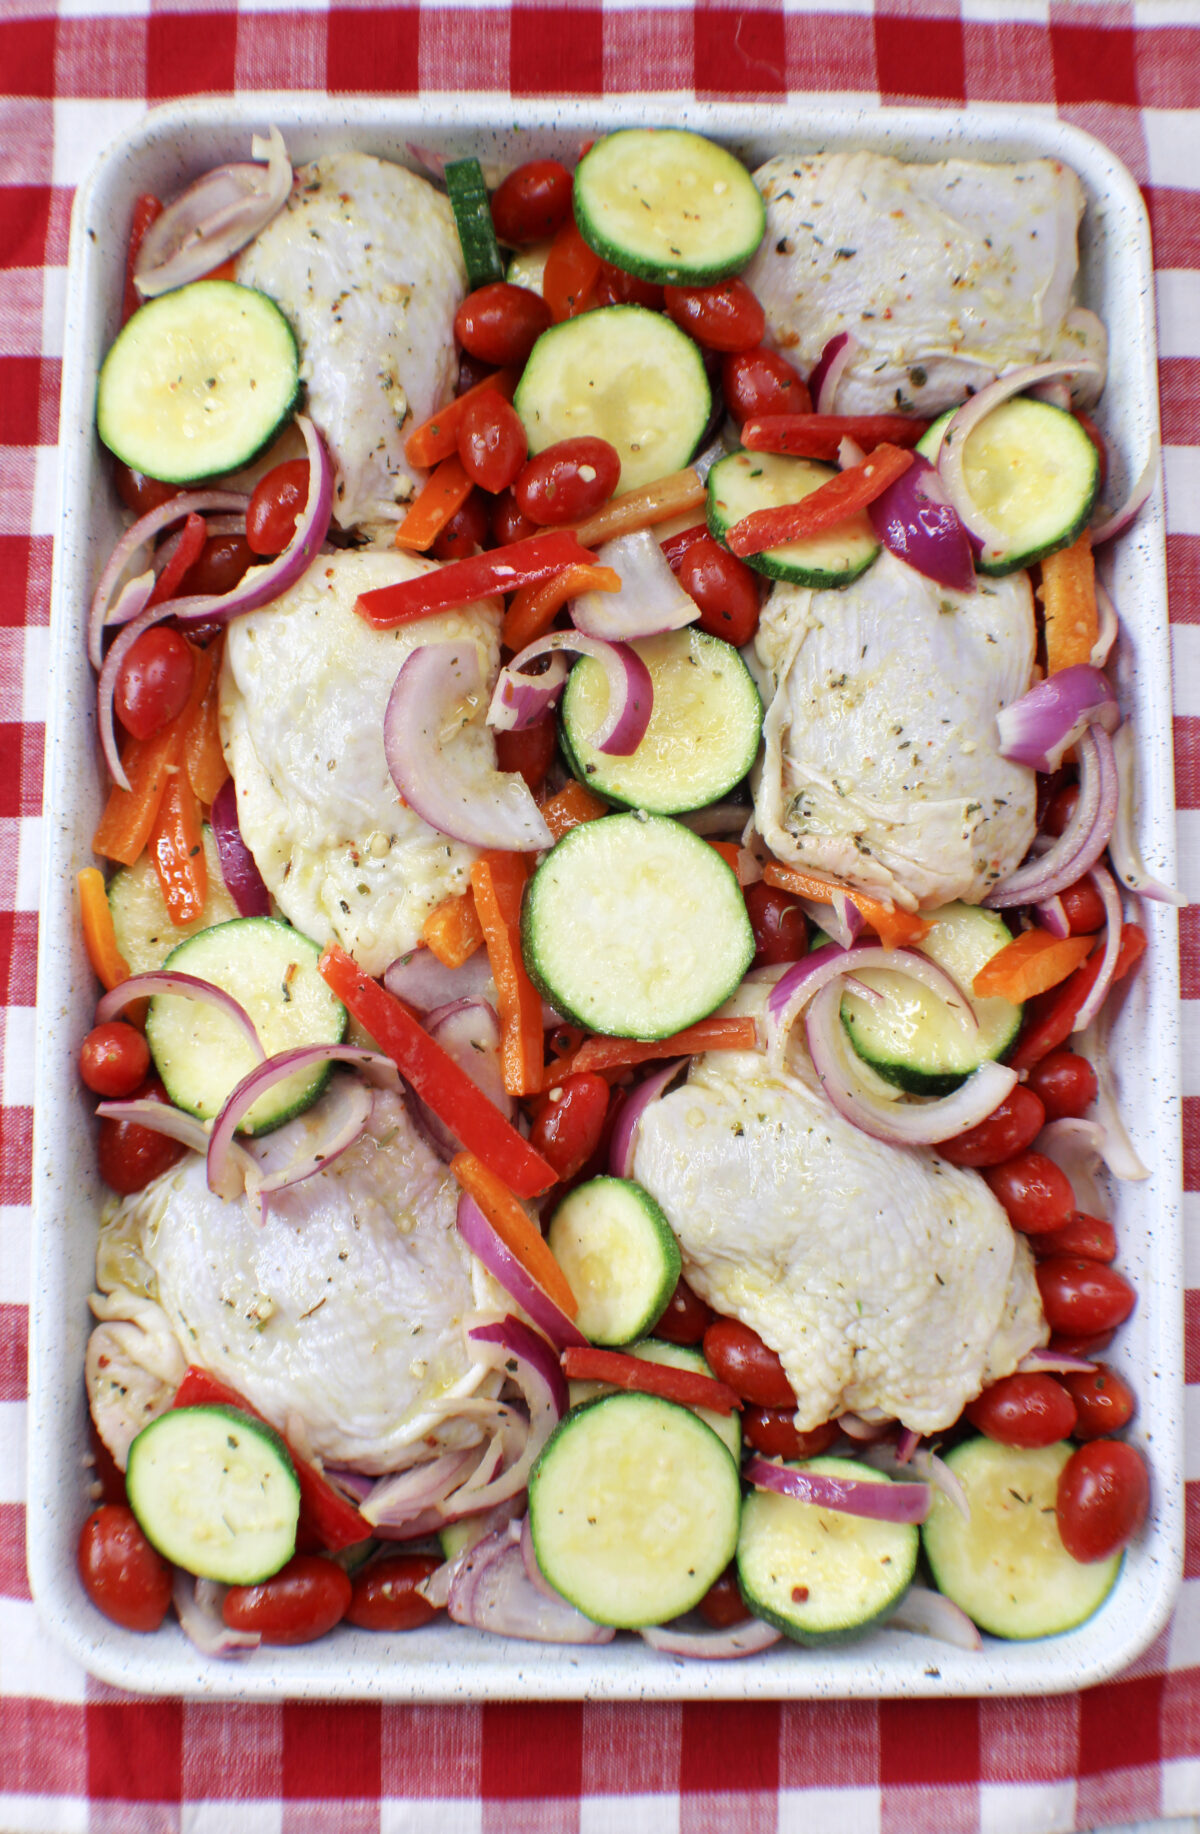 Chicken added to the vegetables on the sheet pan.